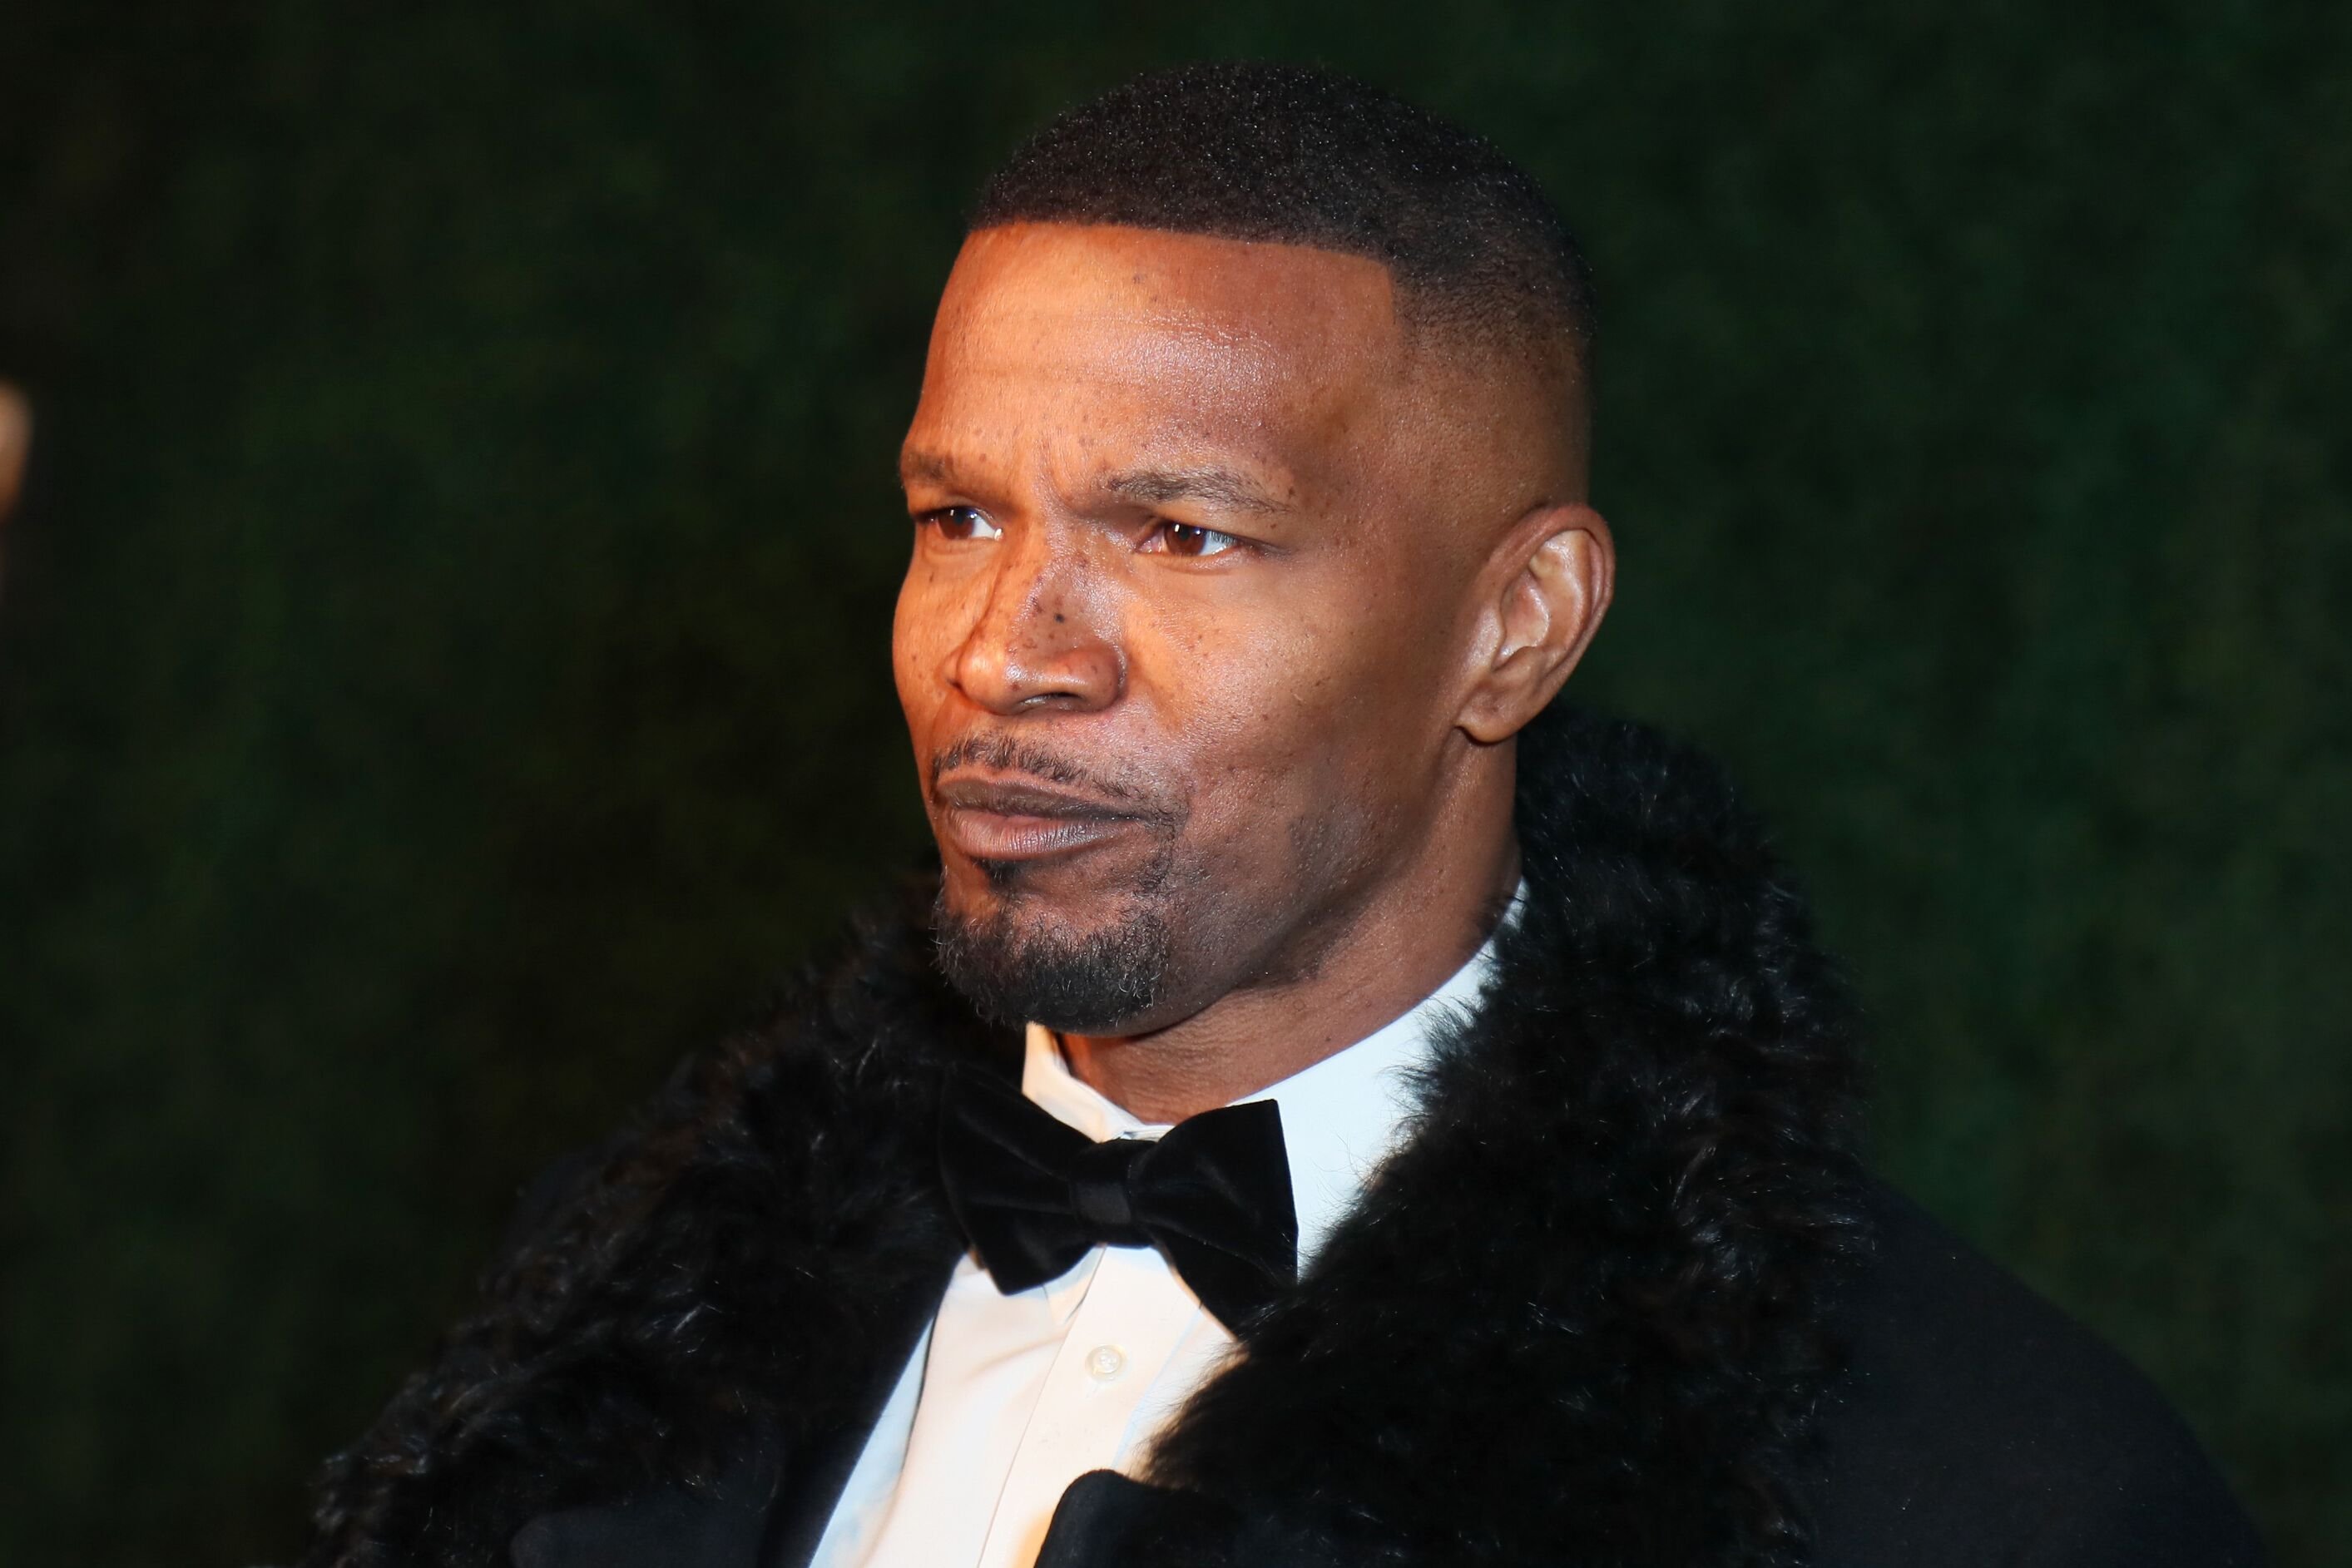 Jamie Foxx at the  2019 Governors Awards/ Source: Getty Image